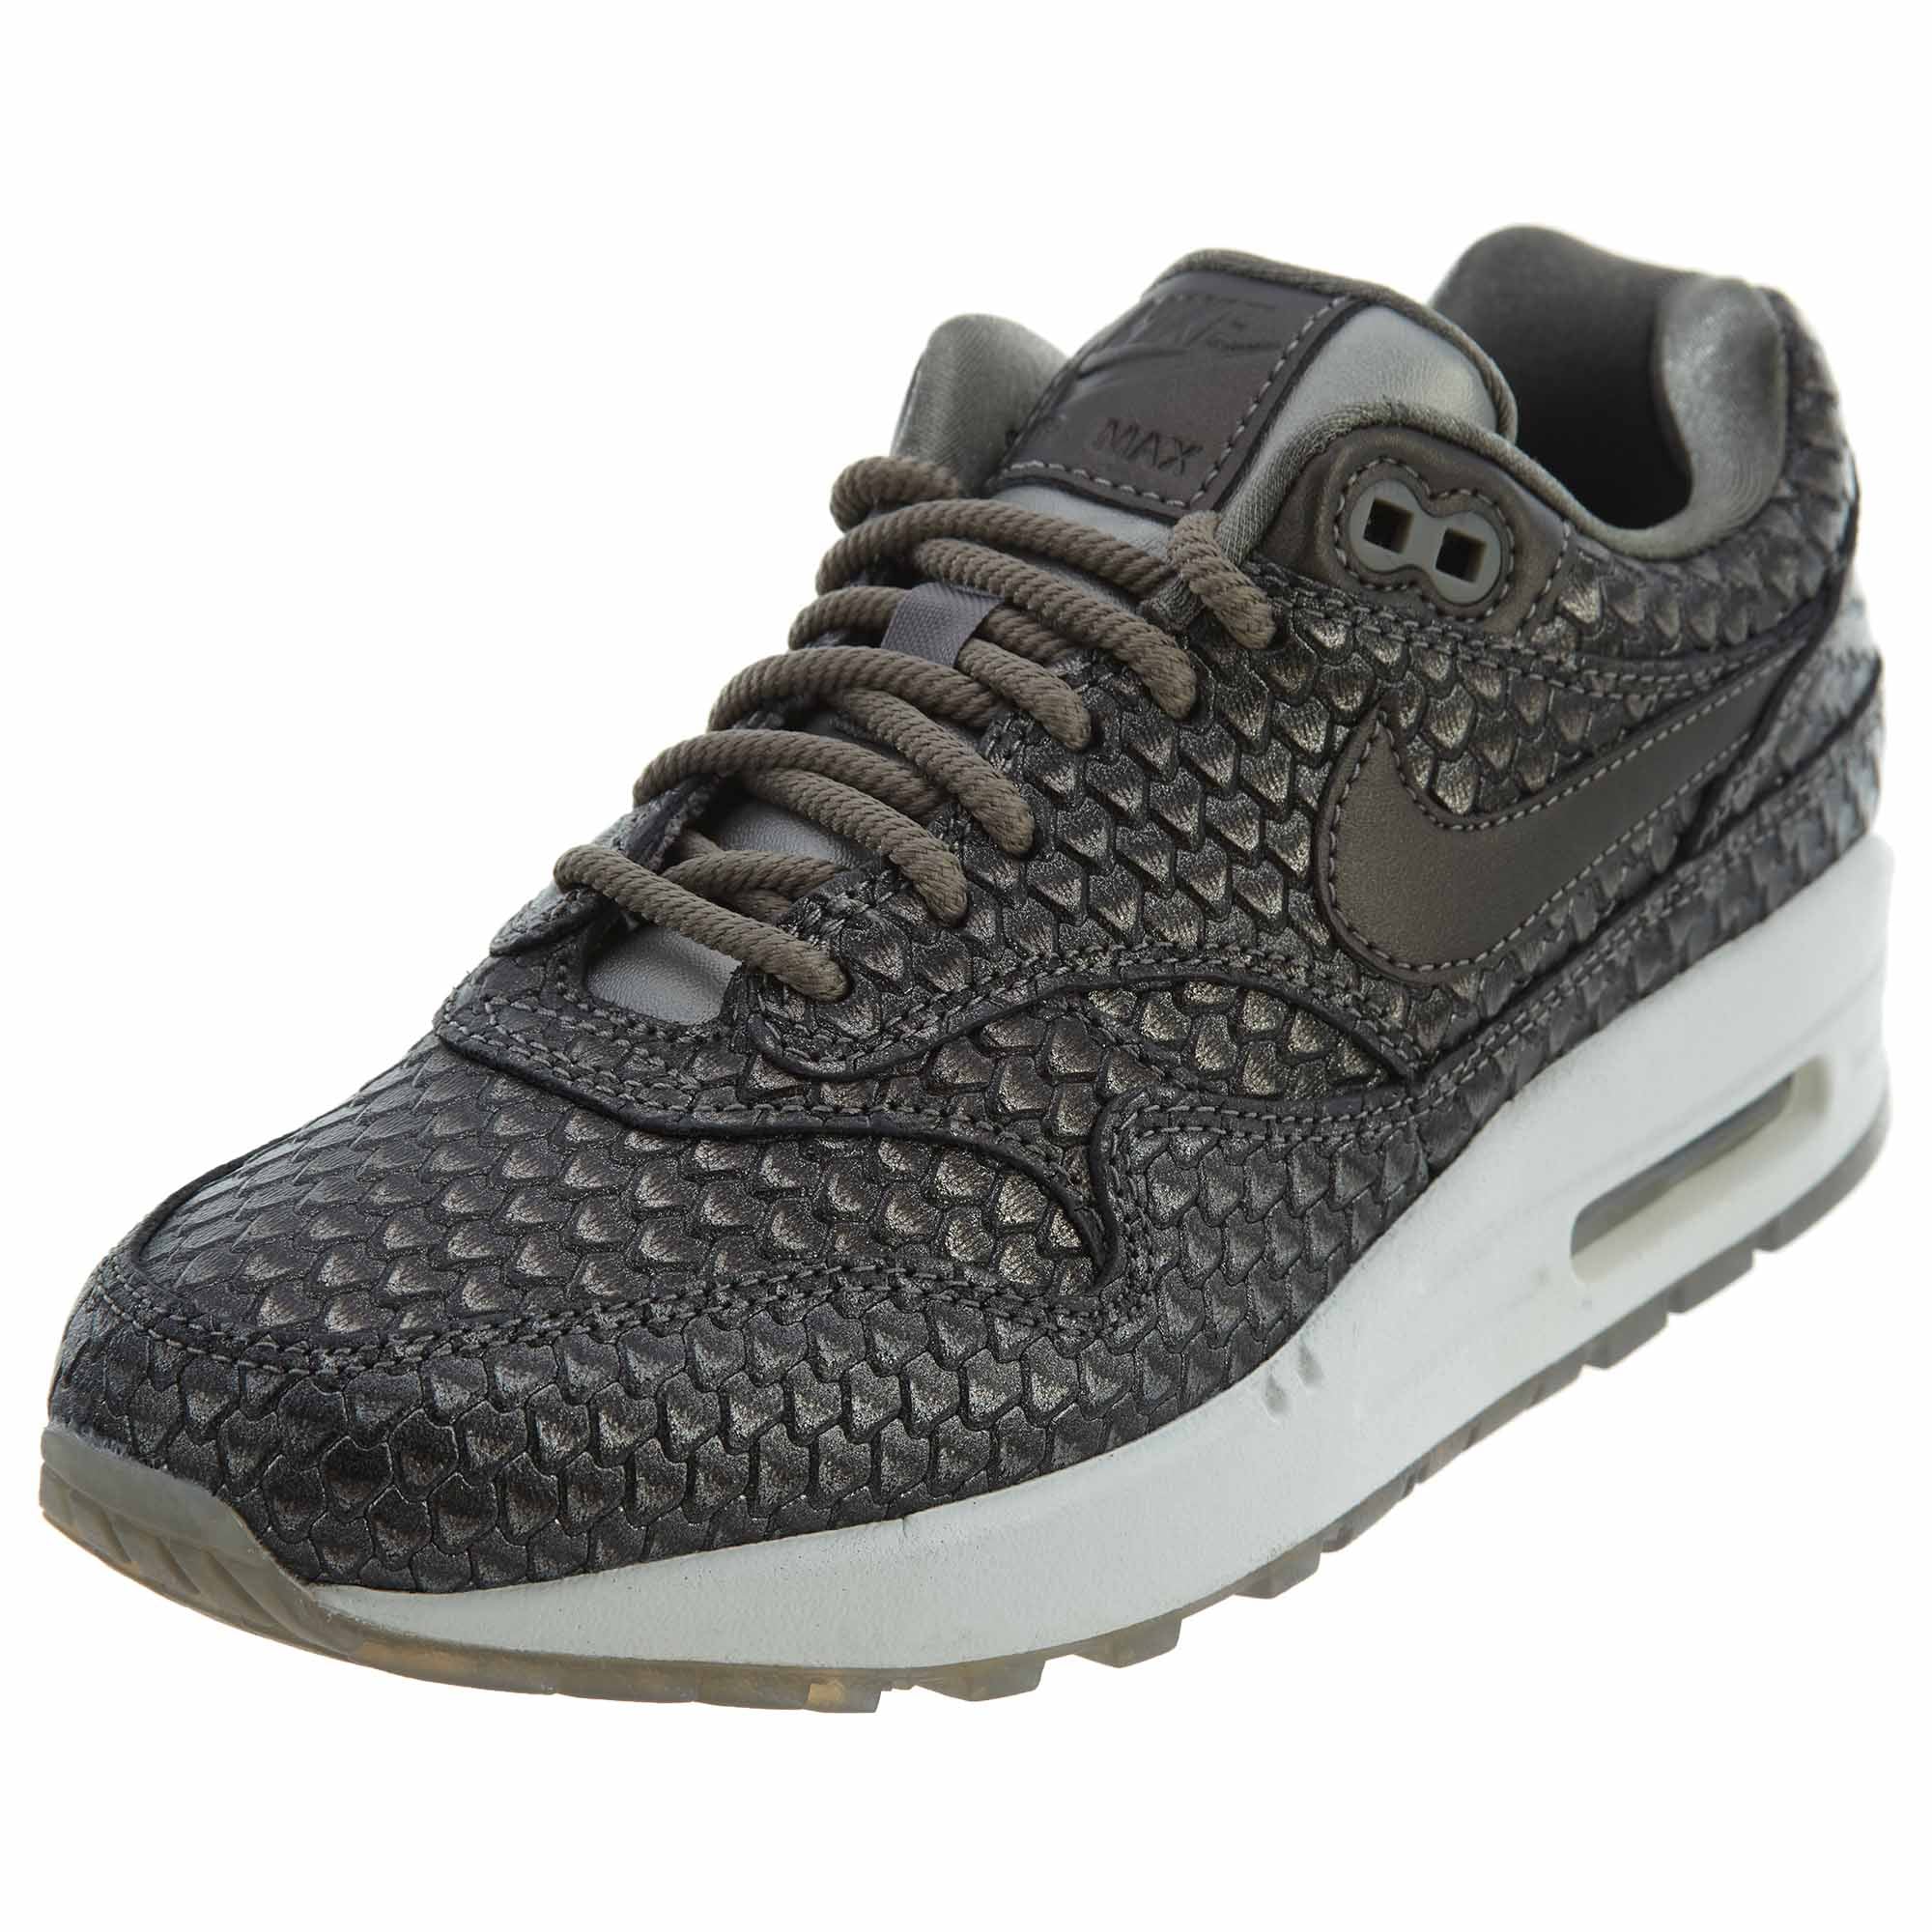 Nike Air Max 1 Premium Leather Sneaker Womens Running Shoes : 454746